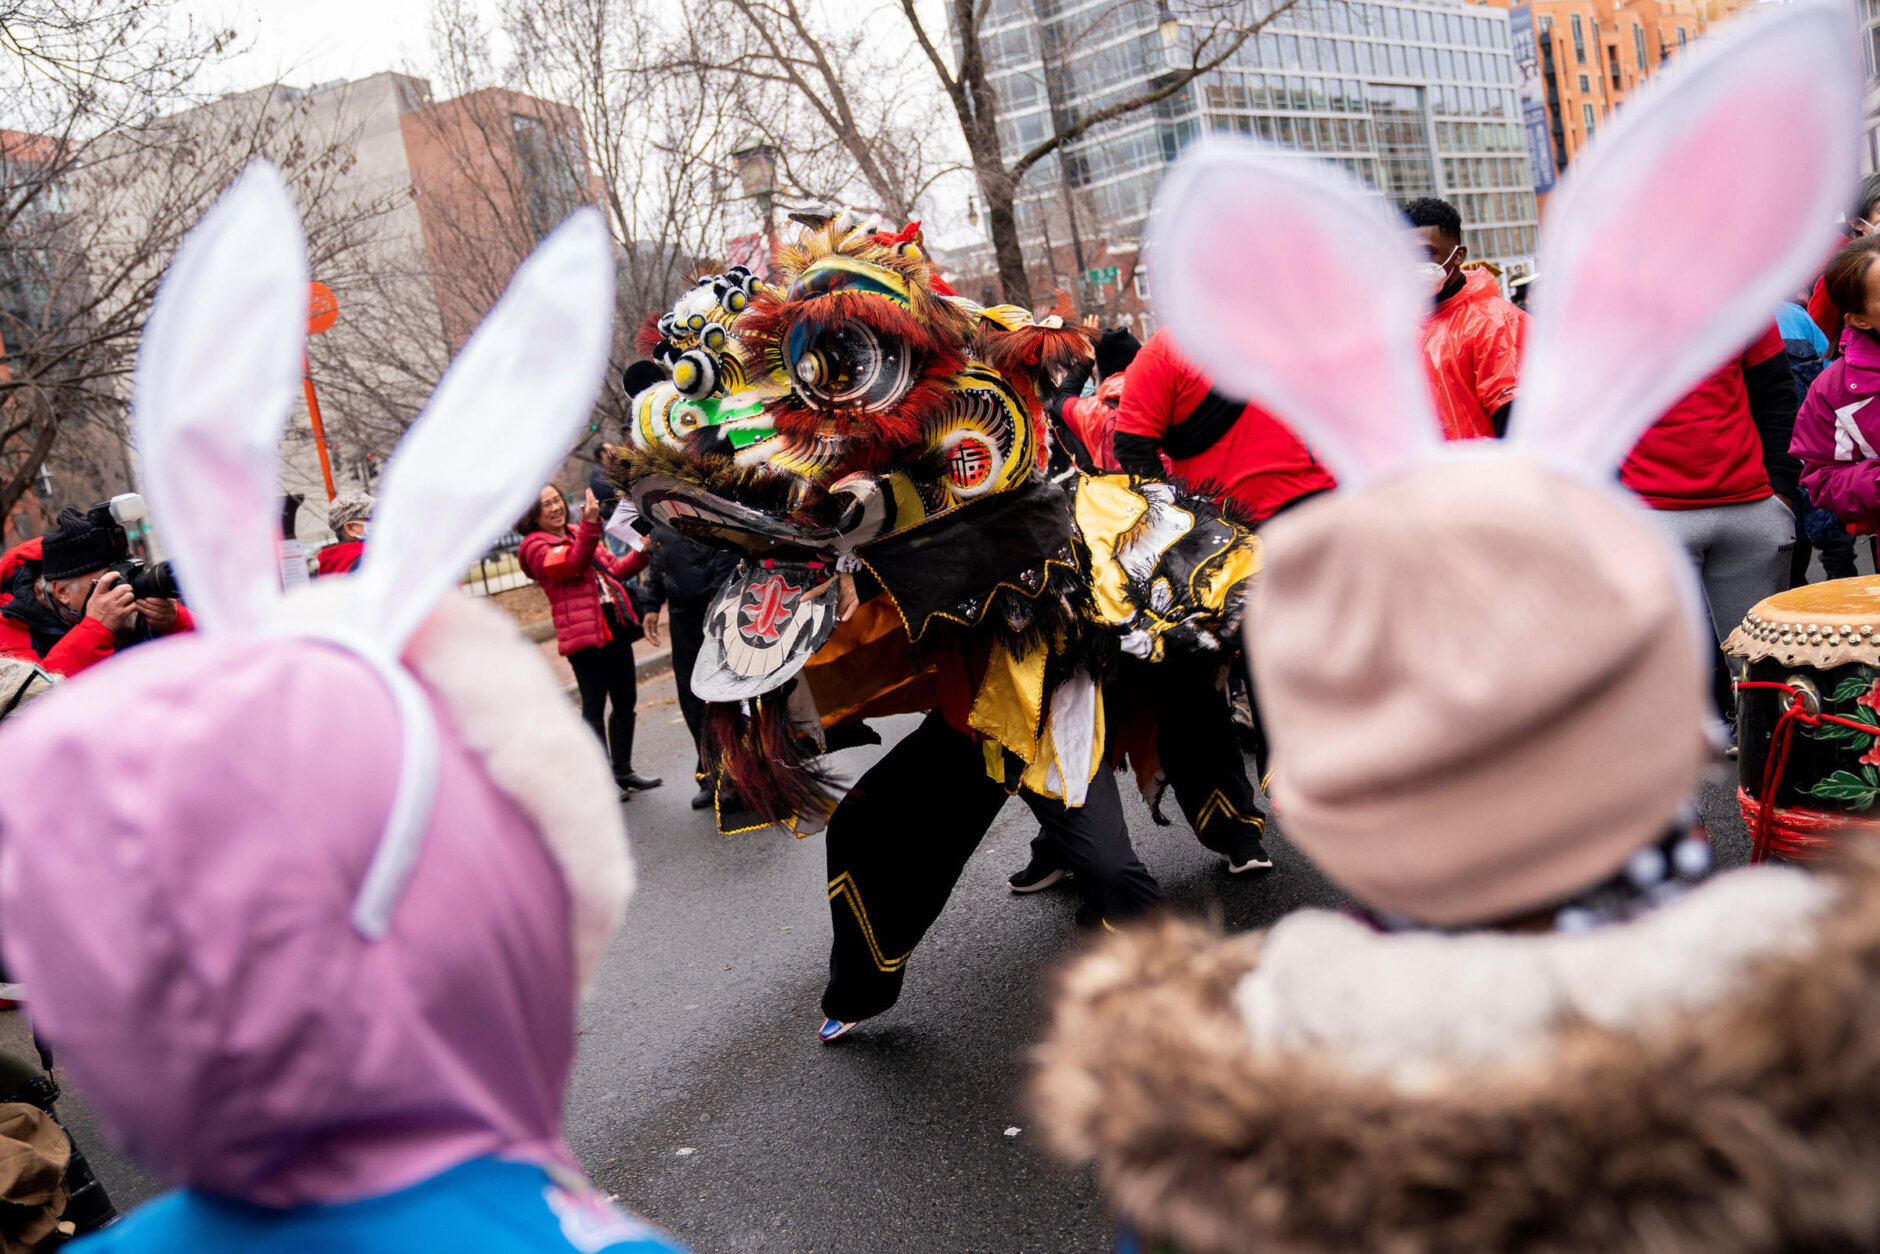 Children wear rabbit ears while watching a dragon dance prior to the Lunar New Year Parade in the Chinatown neighborhood of Washington, DC, on January 22, 2023. - 2023 is the year of the rabbit in the Chinese horoscope. (Photo by Stefani Reynolds / AFP) (Photo by STEFANI REYNOLDS/AFP via Getty Images)